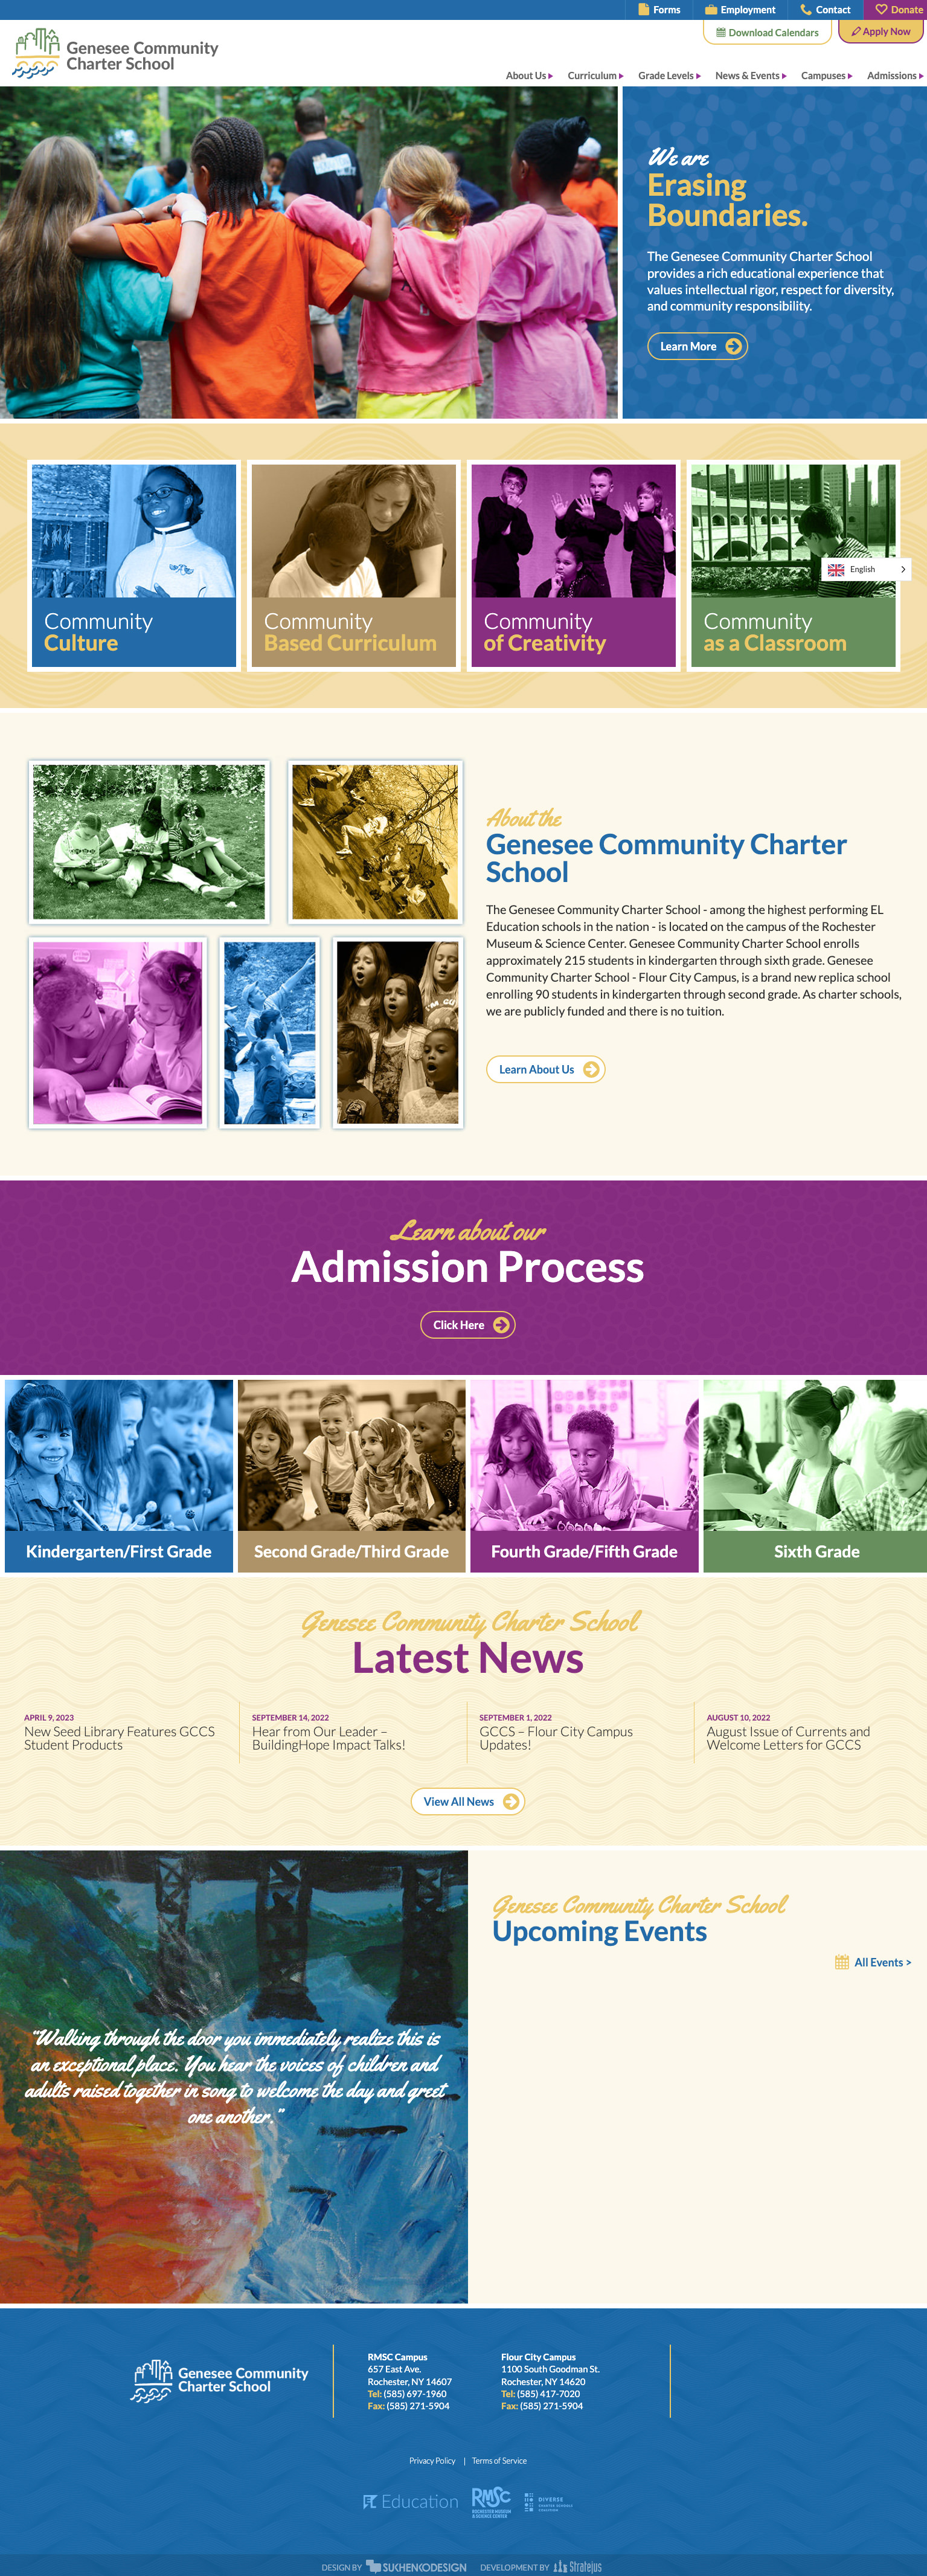 Genesee Community Charter School home page